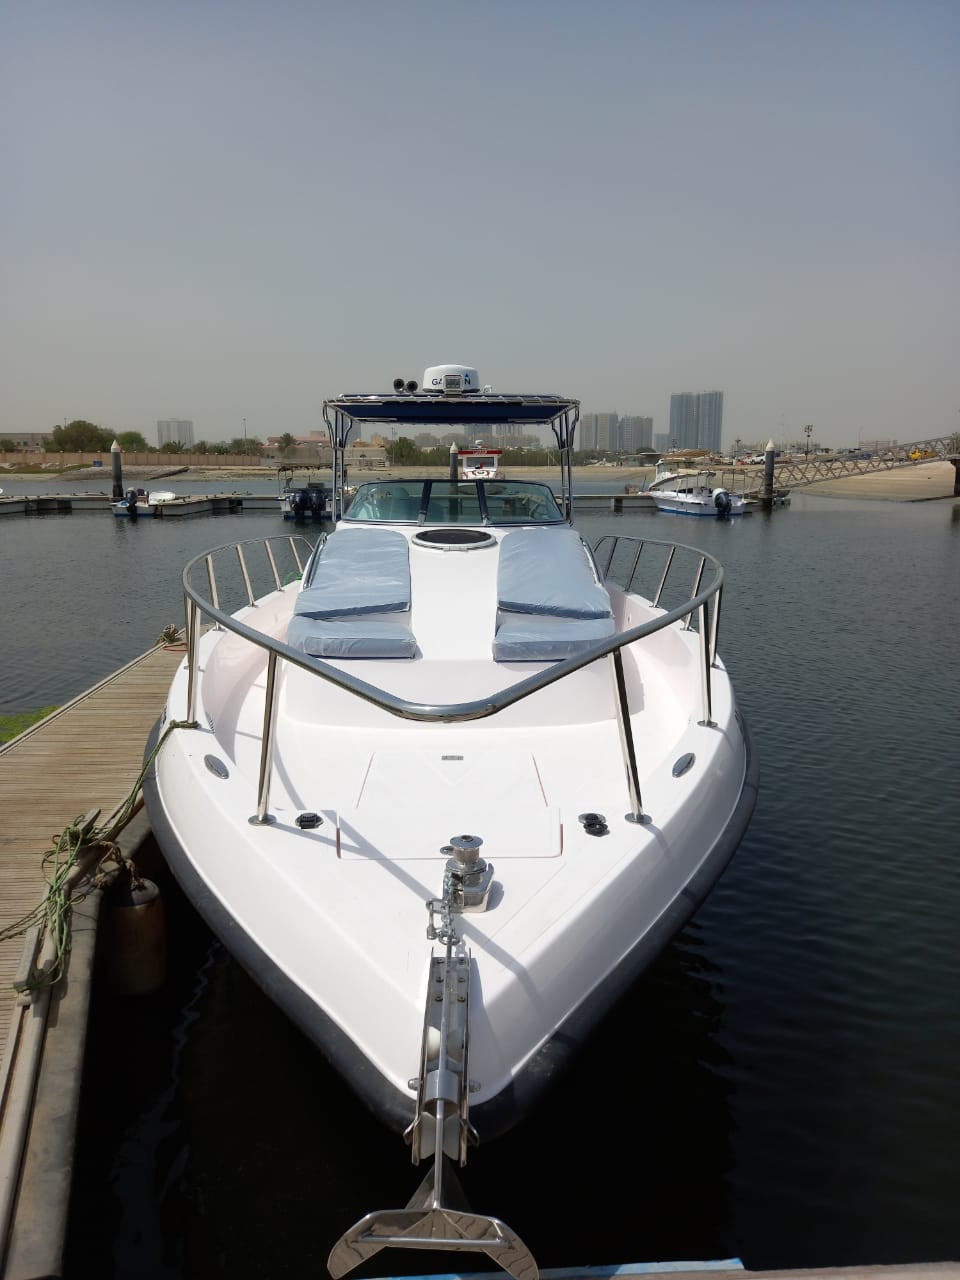 Jas Marine Adds To Their Fleet Of Yachts And Boats